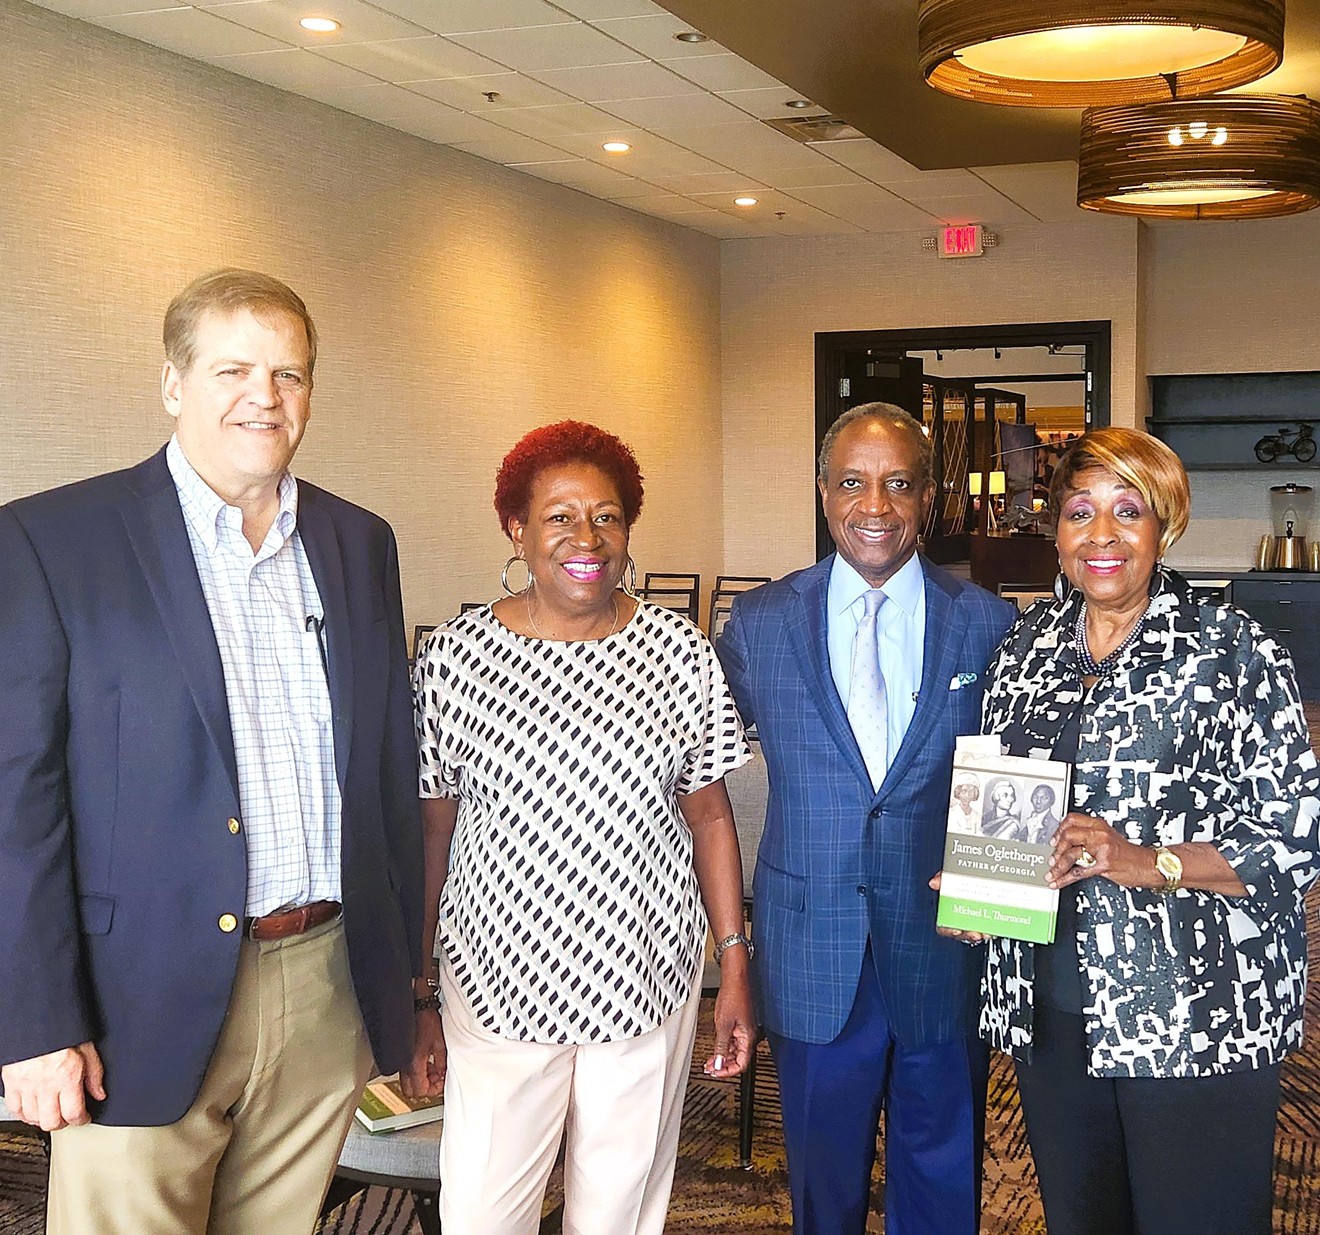 From left to right: Michael Traynor, CEO of Traynor Consulting Services; Tanya Milton, Fifth District County Commissioner, Historian and DeKalb County CEO Michael Thurmond; and Georgia State Rep. Edna Jackson.